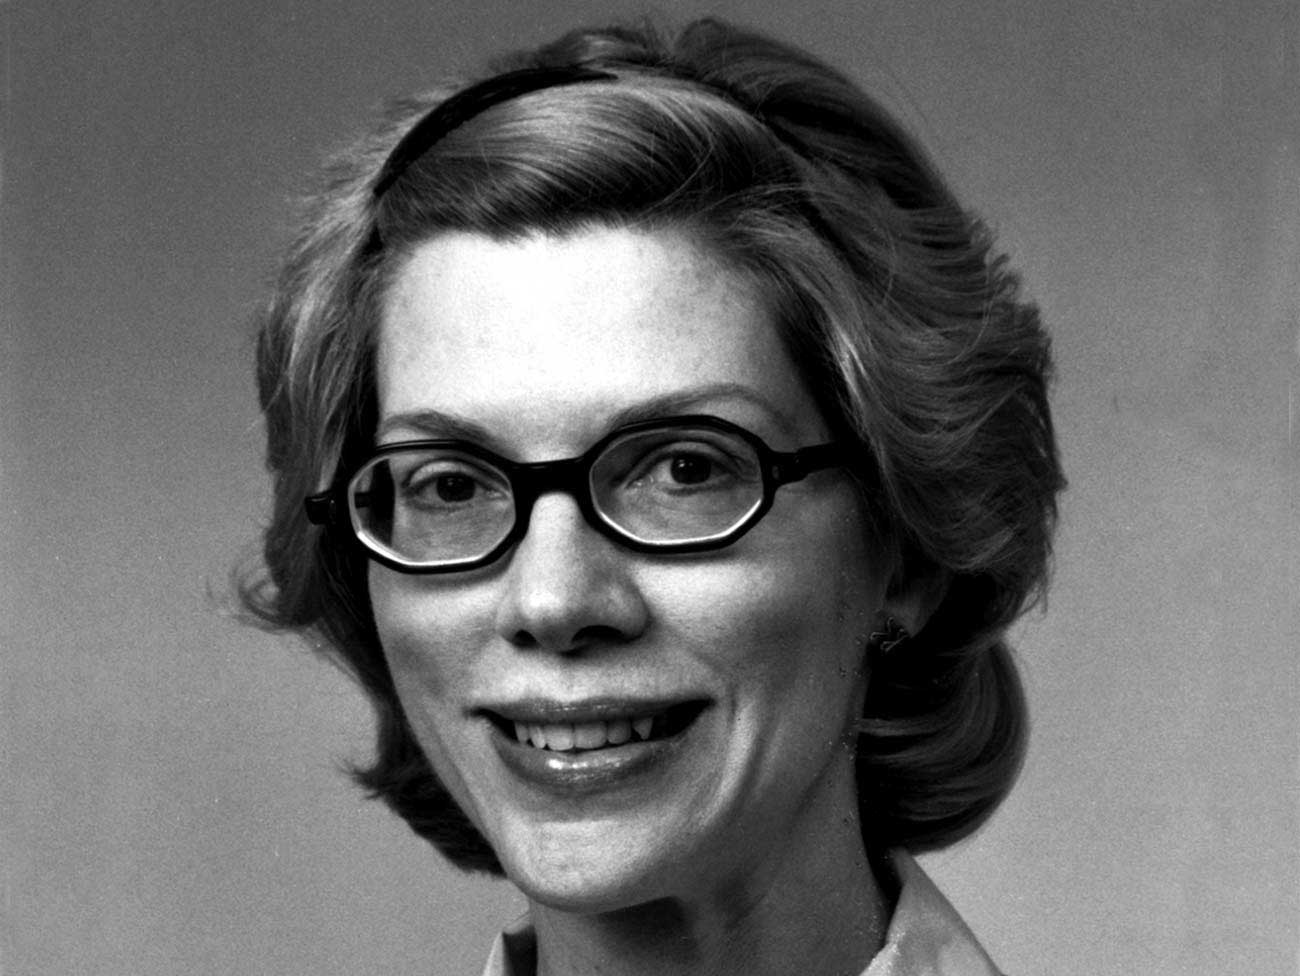 black and white photo of a woman smiling and wearing glasses